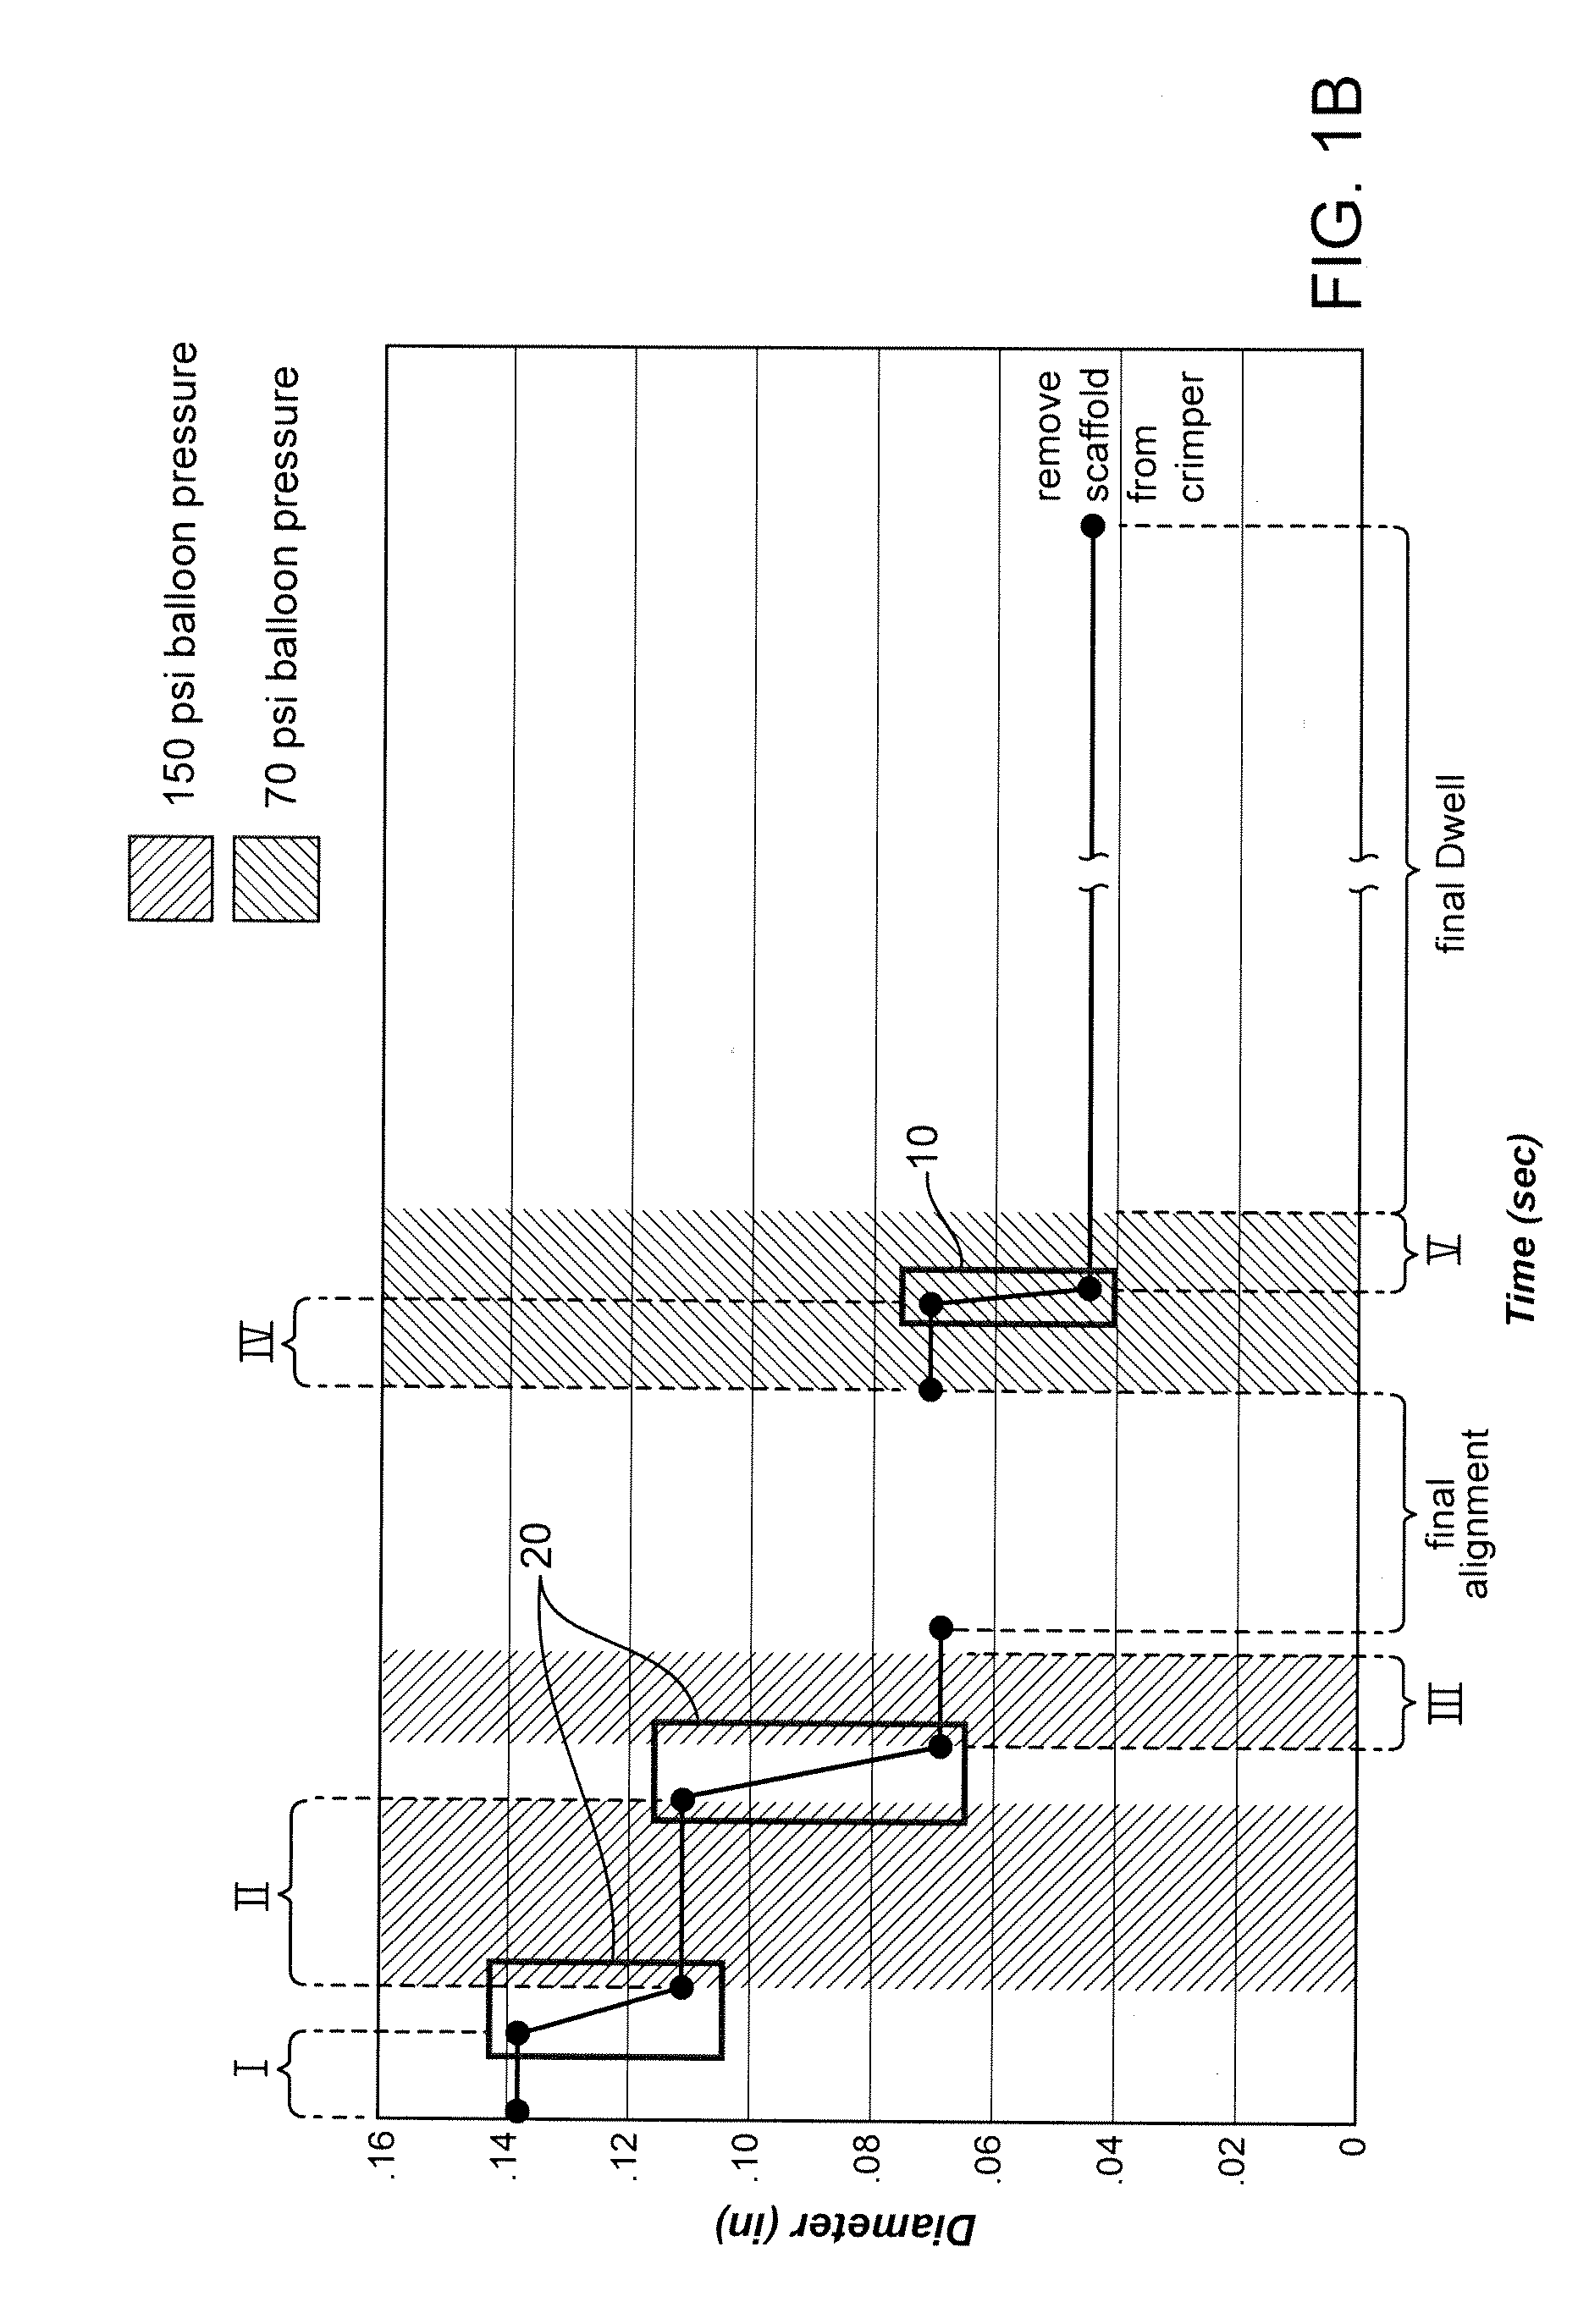 Uniform Crimping and Deployment Methods for Polymer Scaffold